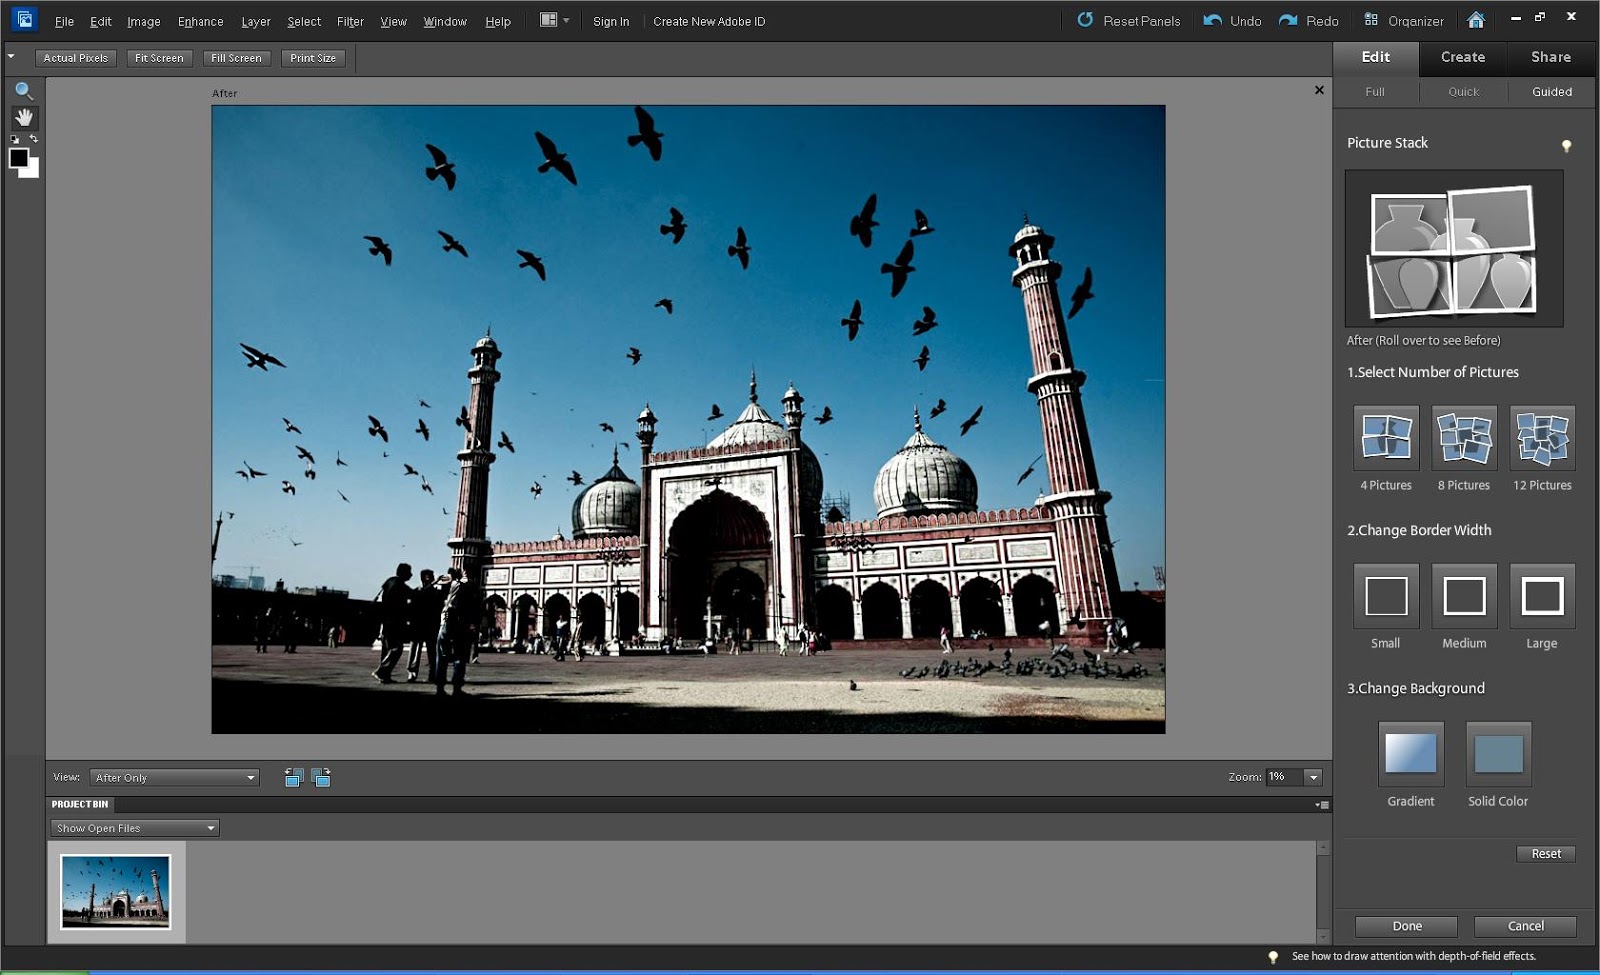 Picture Stack is one of the new features in Adobe Photoshop Elements ...